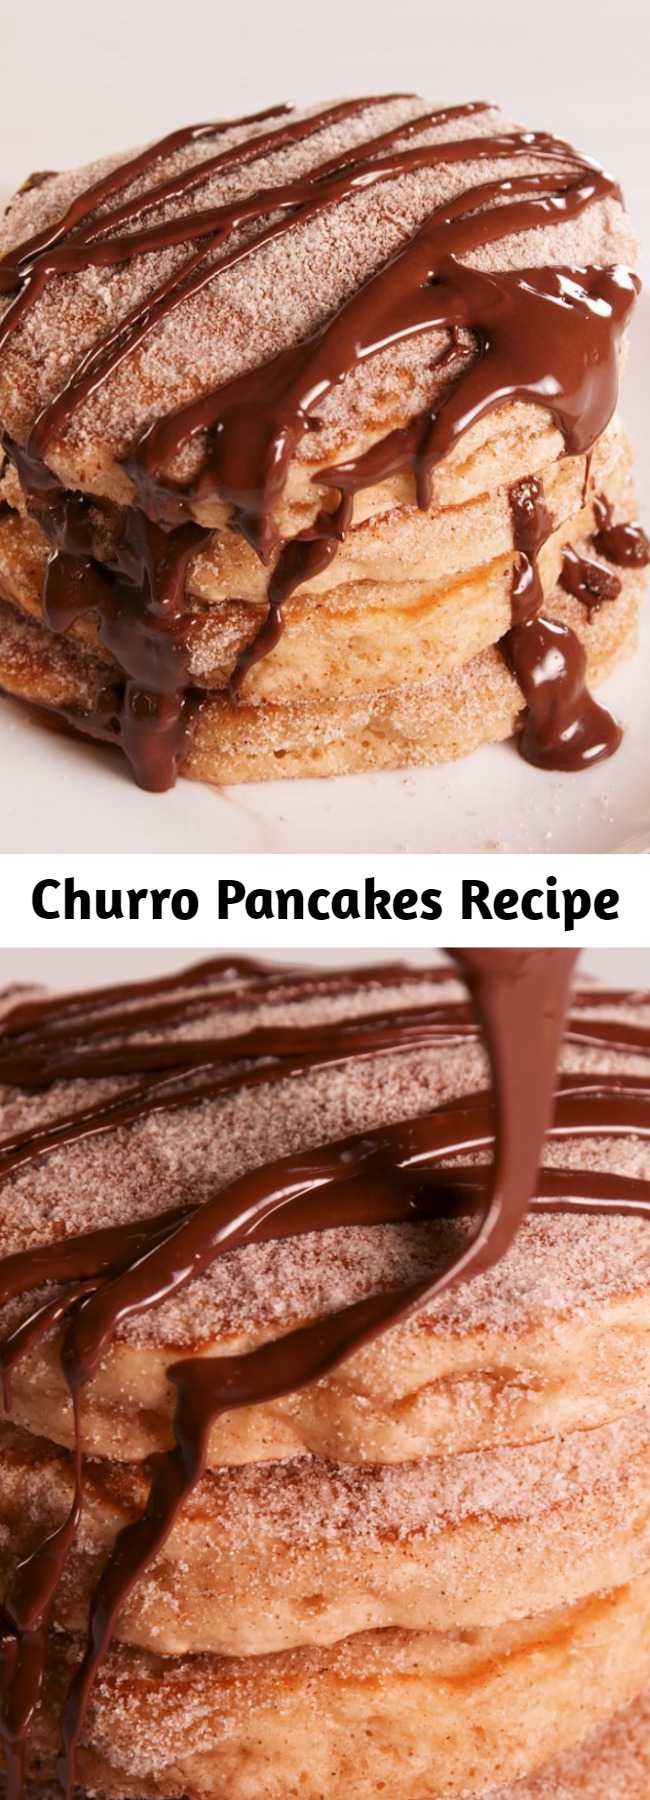 Churro Pancakes Recipe - Churro pancakes are BEYOND fluffy. Cinnamon, brown sugar, and melted chocolate make these a brunch staple. #easy #recipe #churro #Pancakes #churropancakes #brownsugar #breakfast #brunch #indulgent